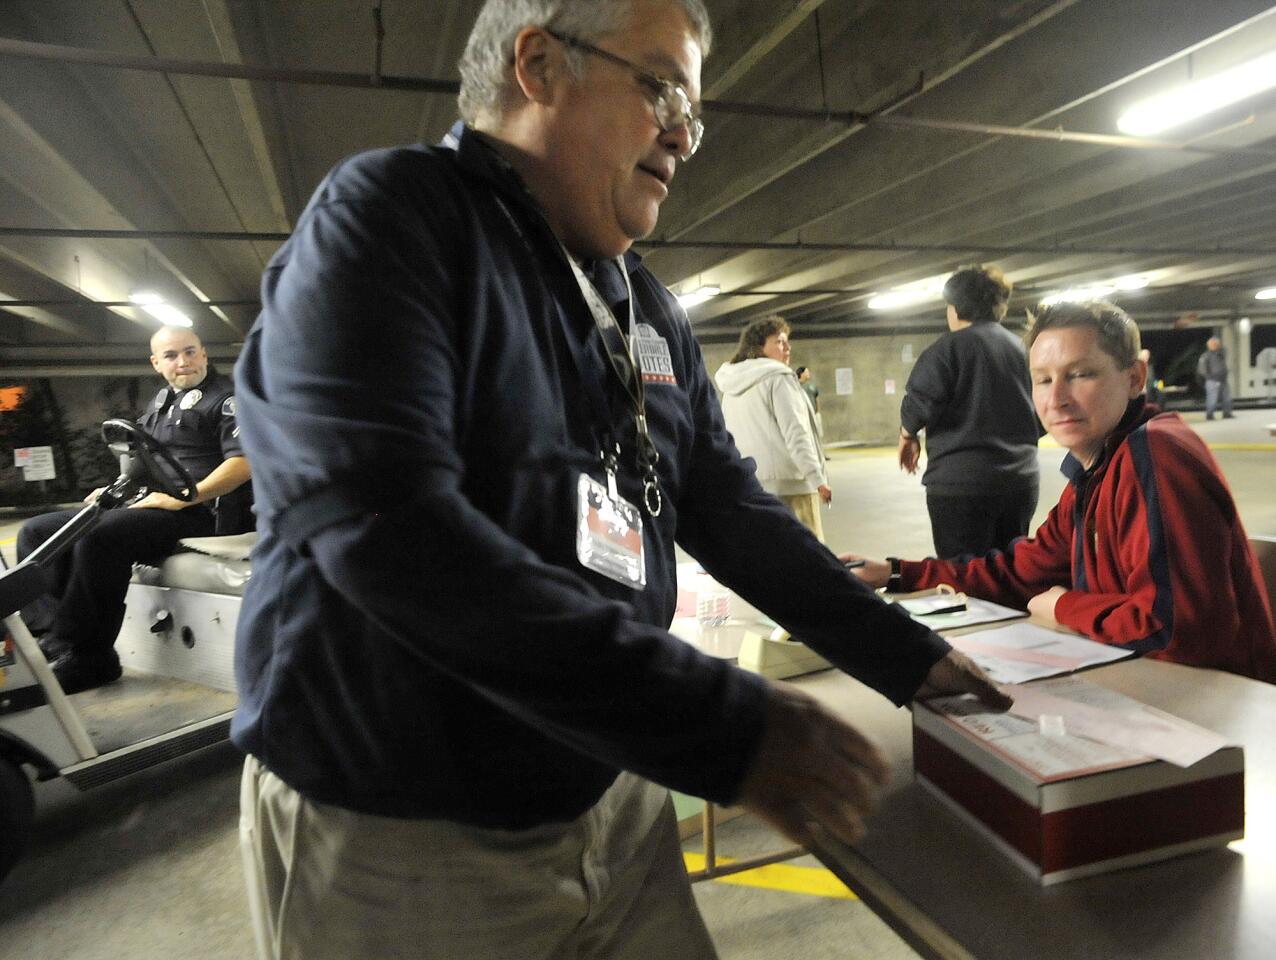 Photo Gallery: Election day ballots in Glendale are counted